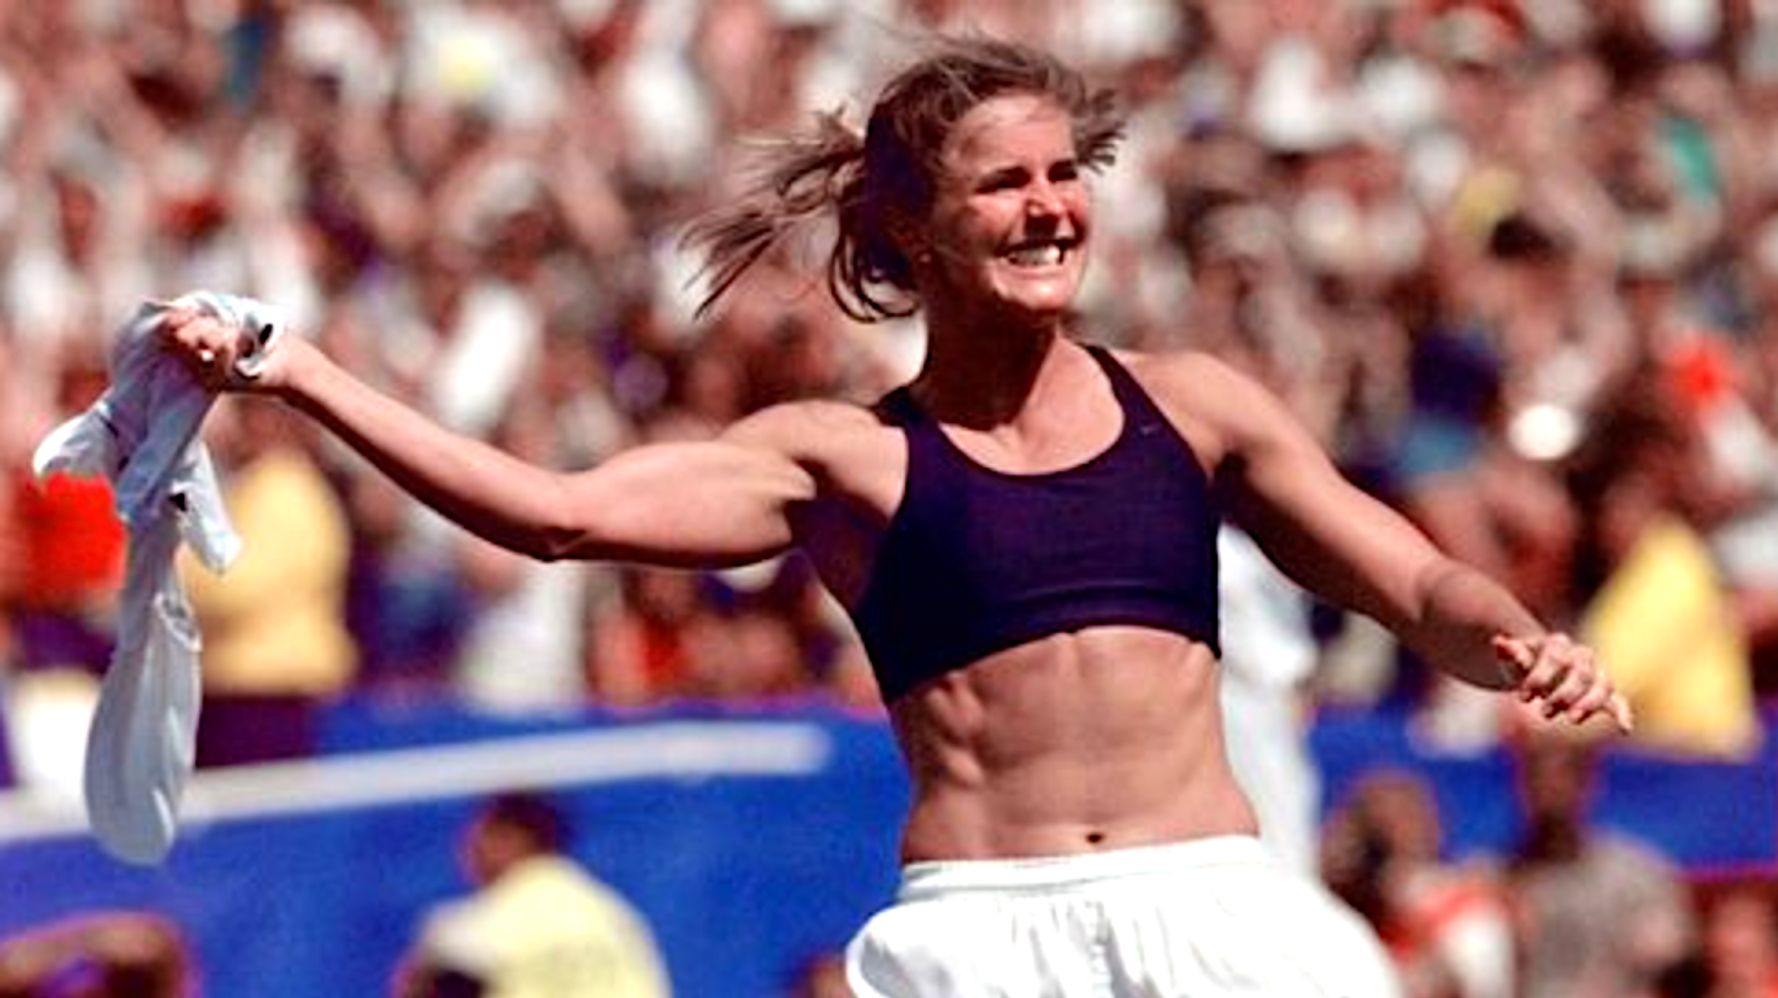 Brandi Chastain's Iconic Sports Bra Finally Gets The Honor It Deserves